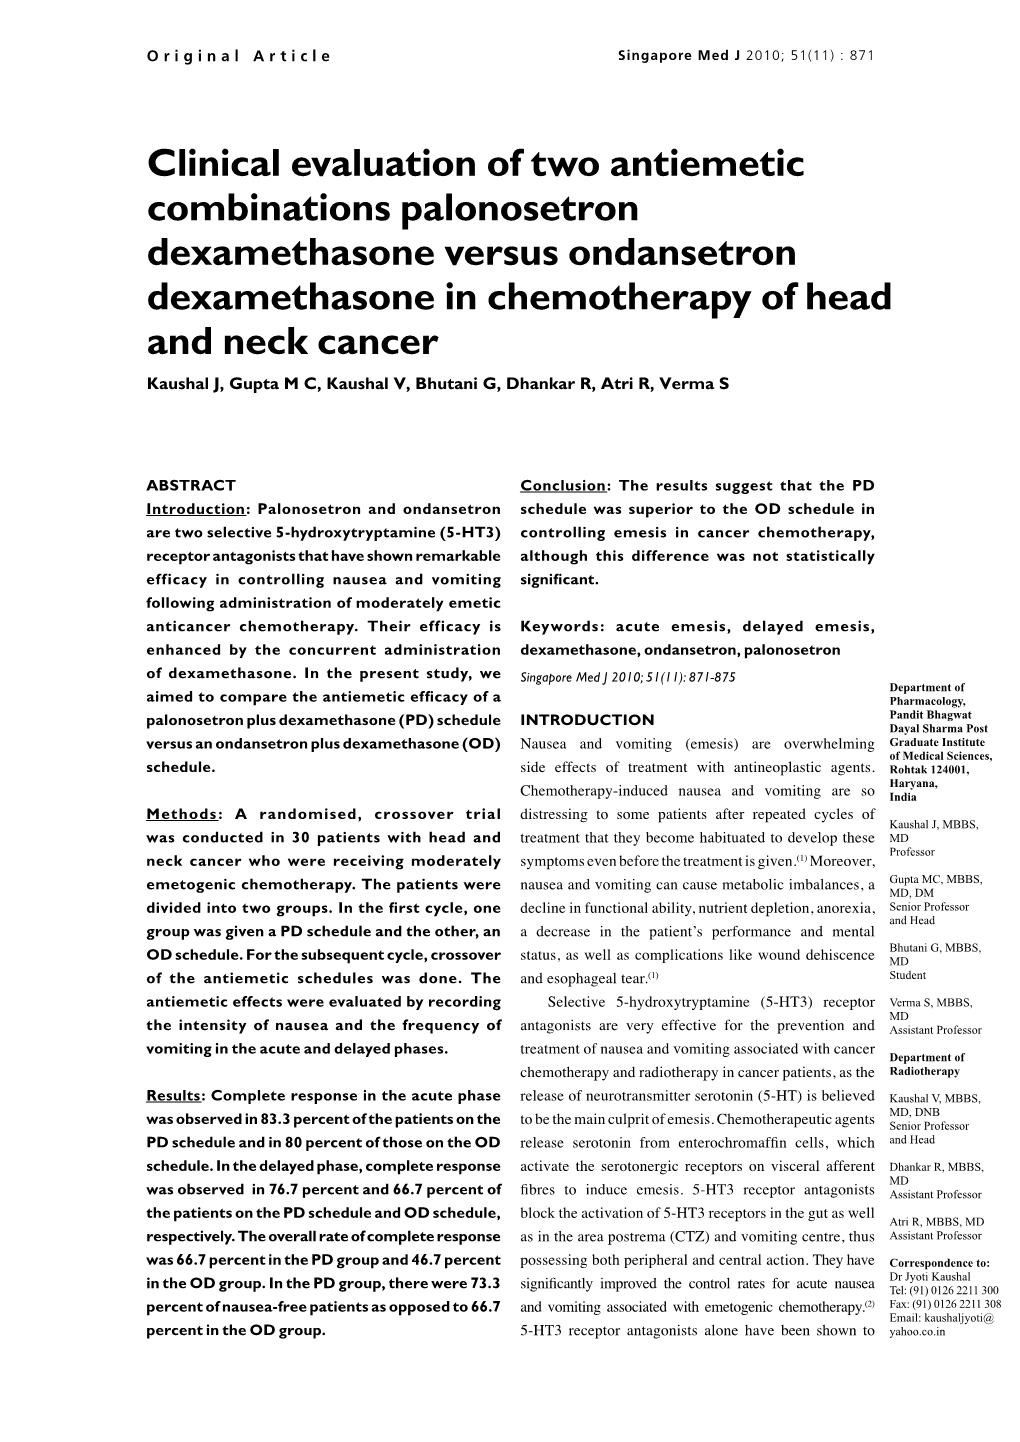 Clinical Evaluation of Two Antiemetic Combinations Palonosetron